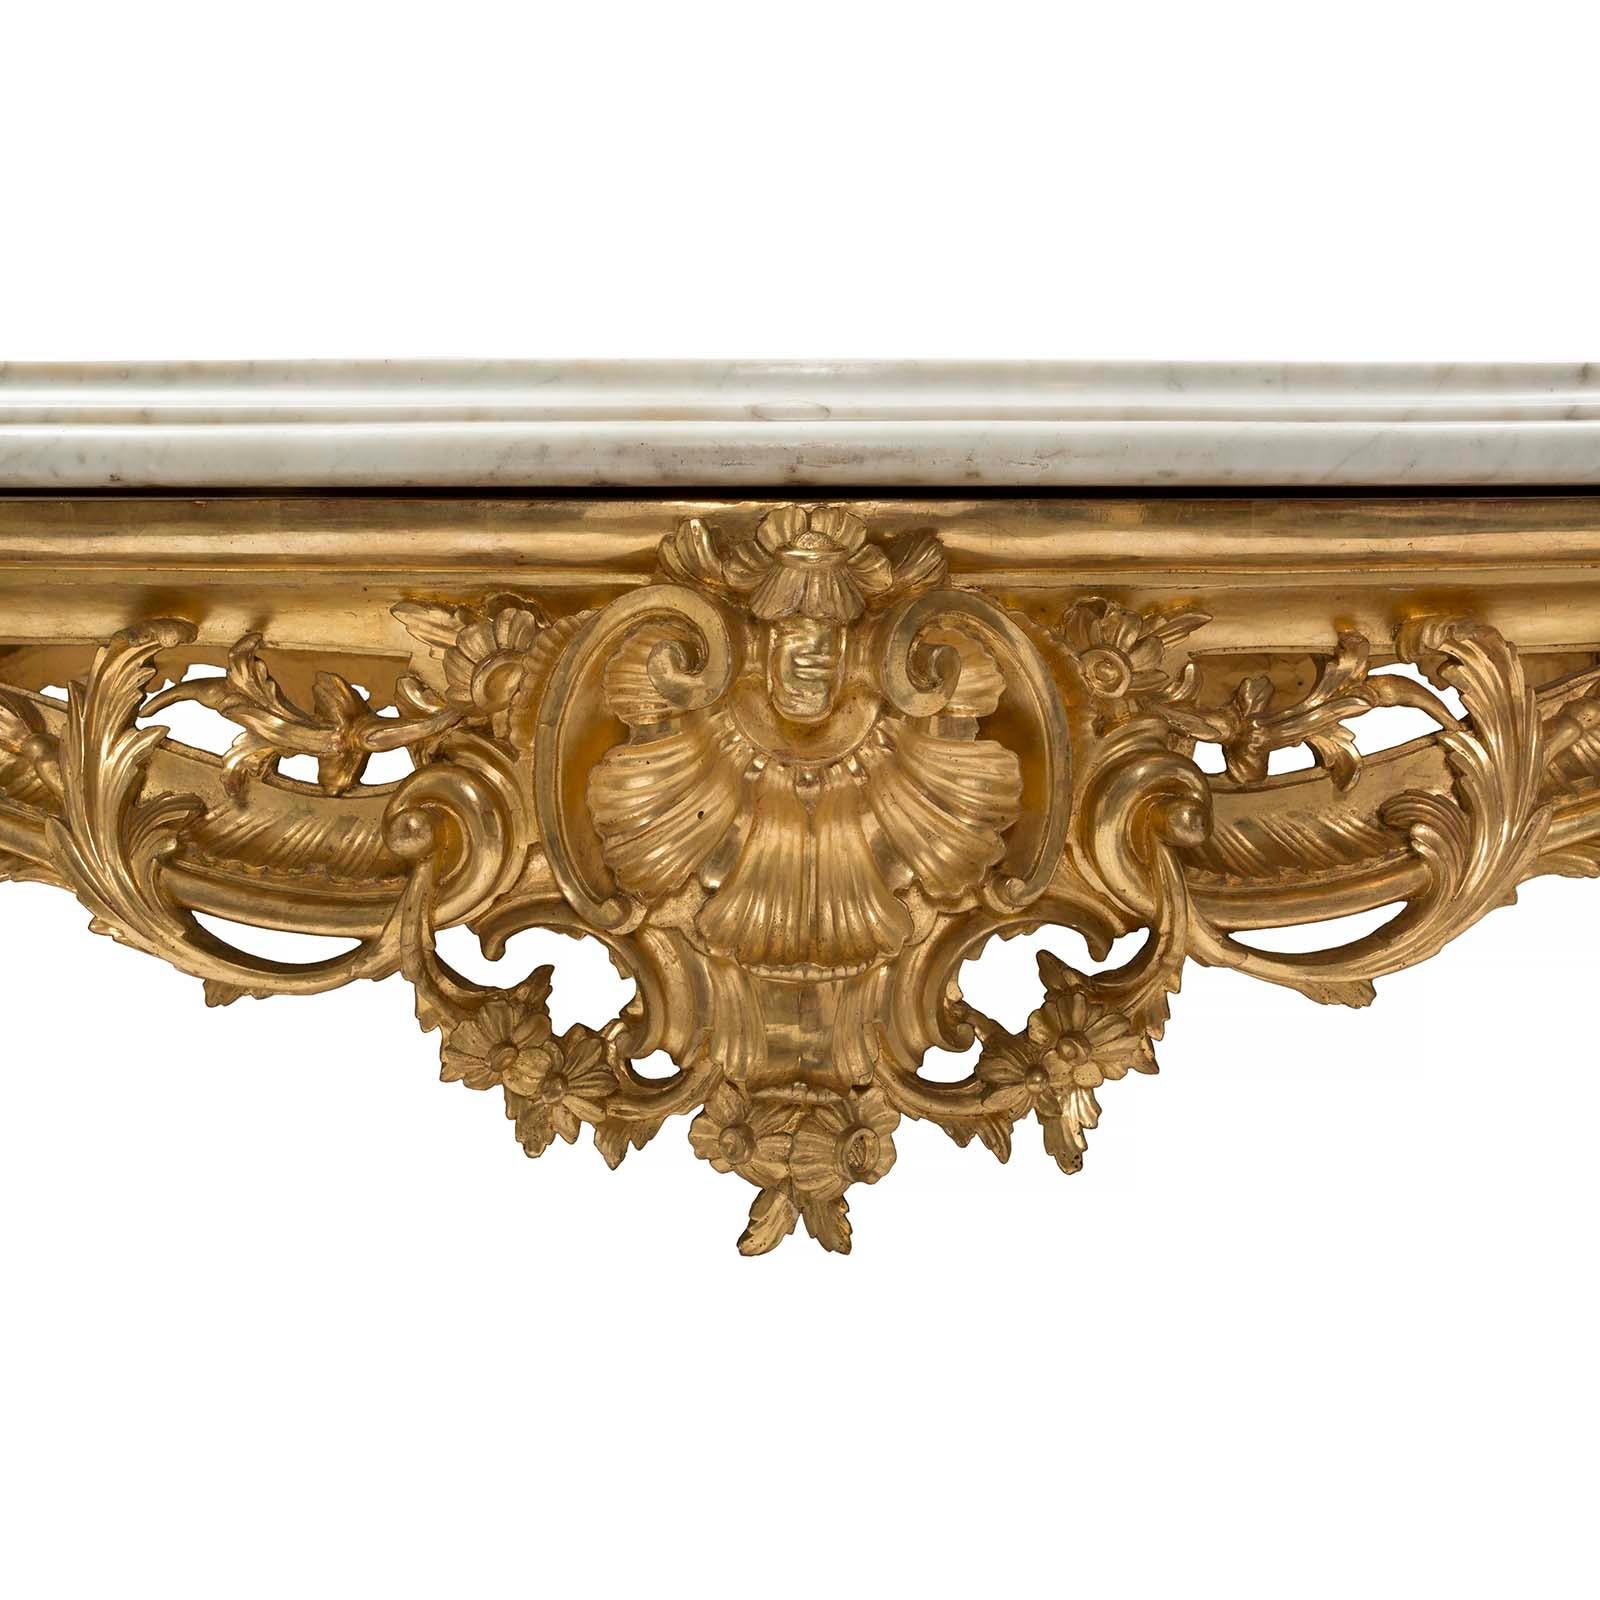 Italian Early 19th Century Louis XV Style Giltwood and Marble Center Table For Sale 4